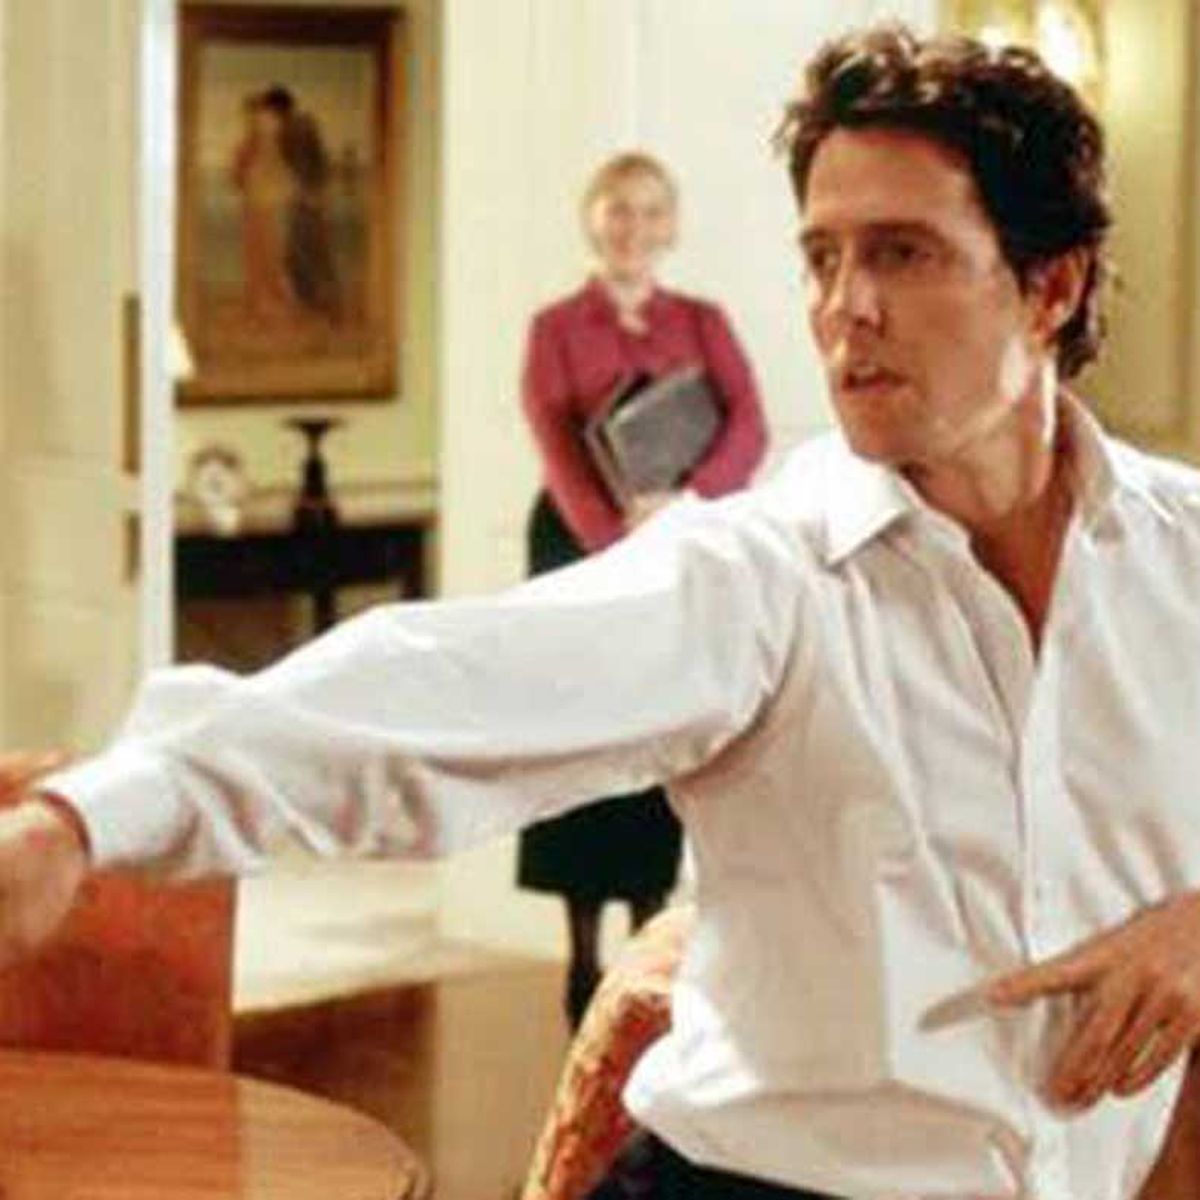 Hugh Grant says iconic Love Actually dancing scene was 'absolute hell' -  9Celebrity